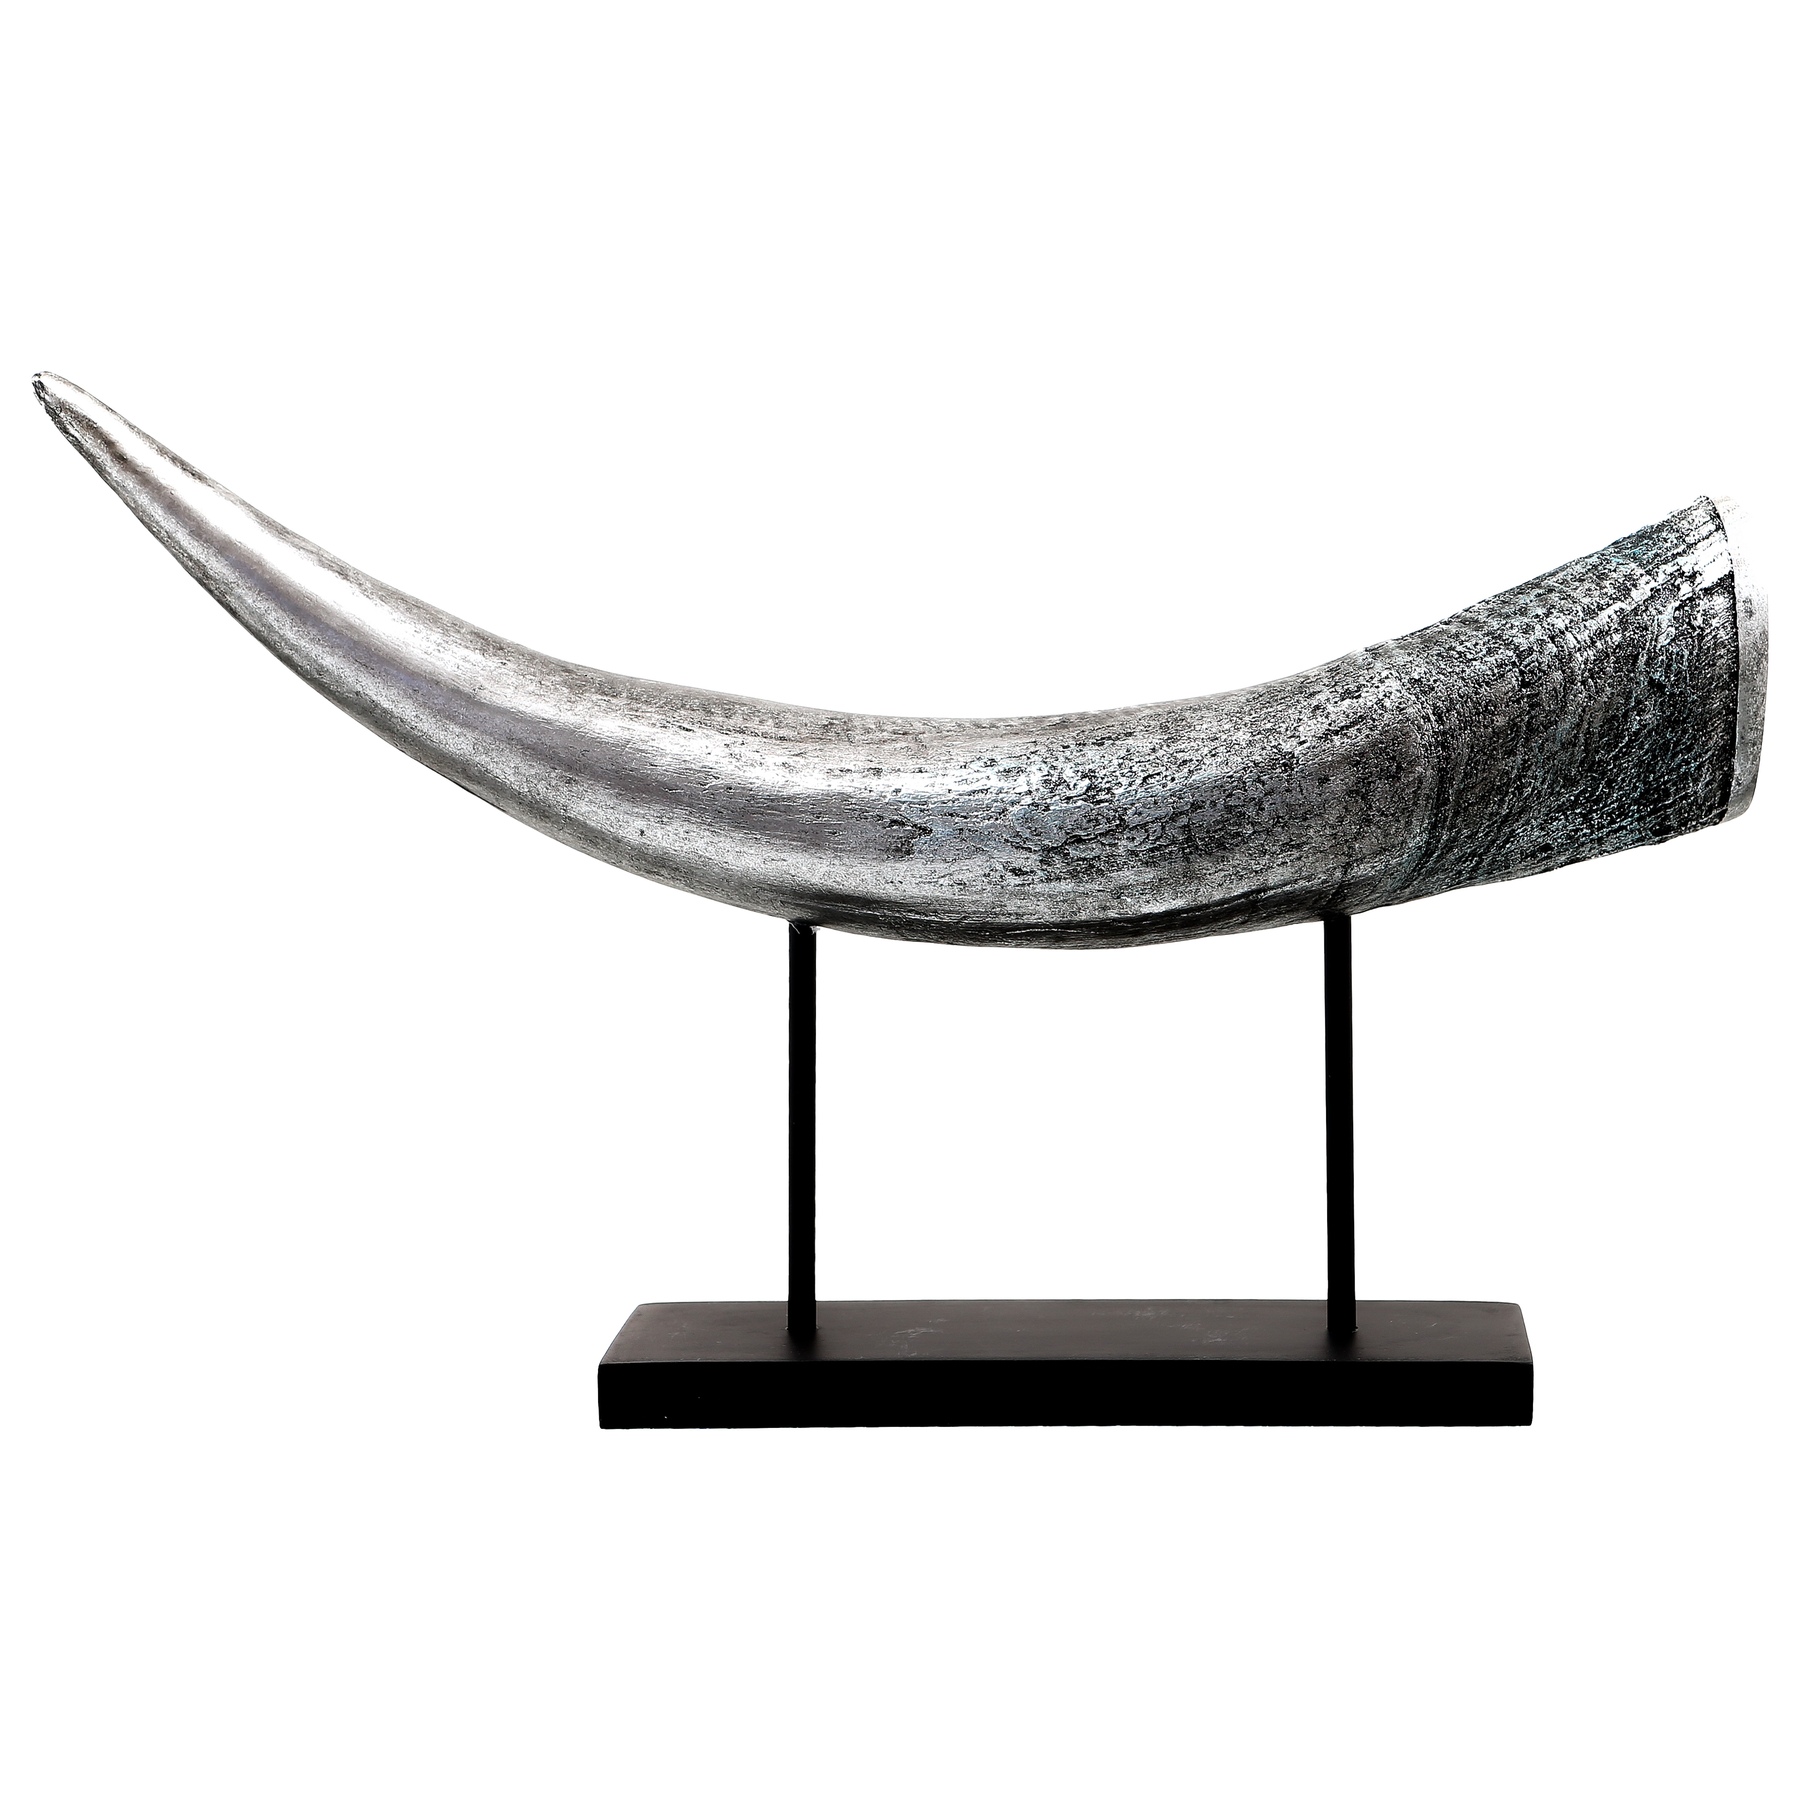 Black And Silver Large Bull Horn Ornament - Image 1